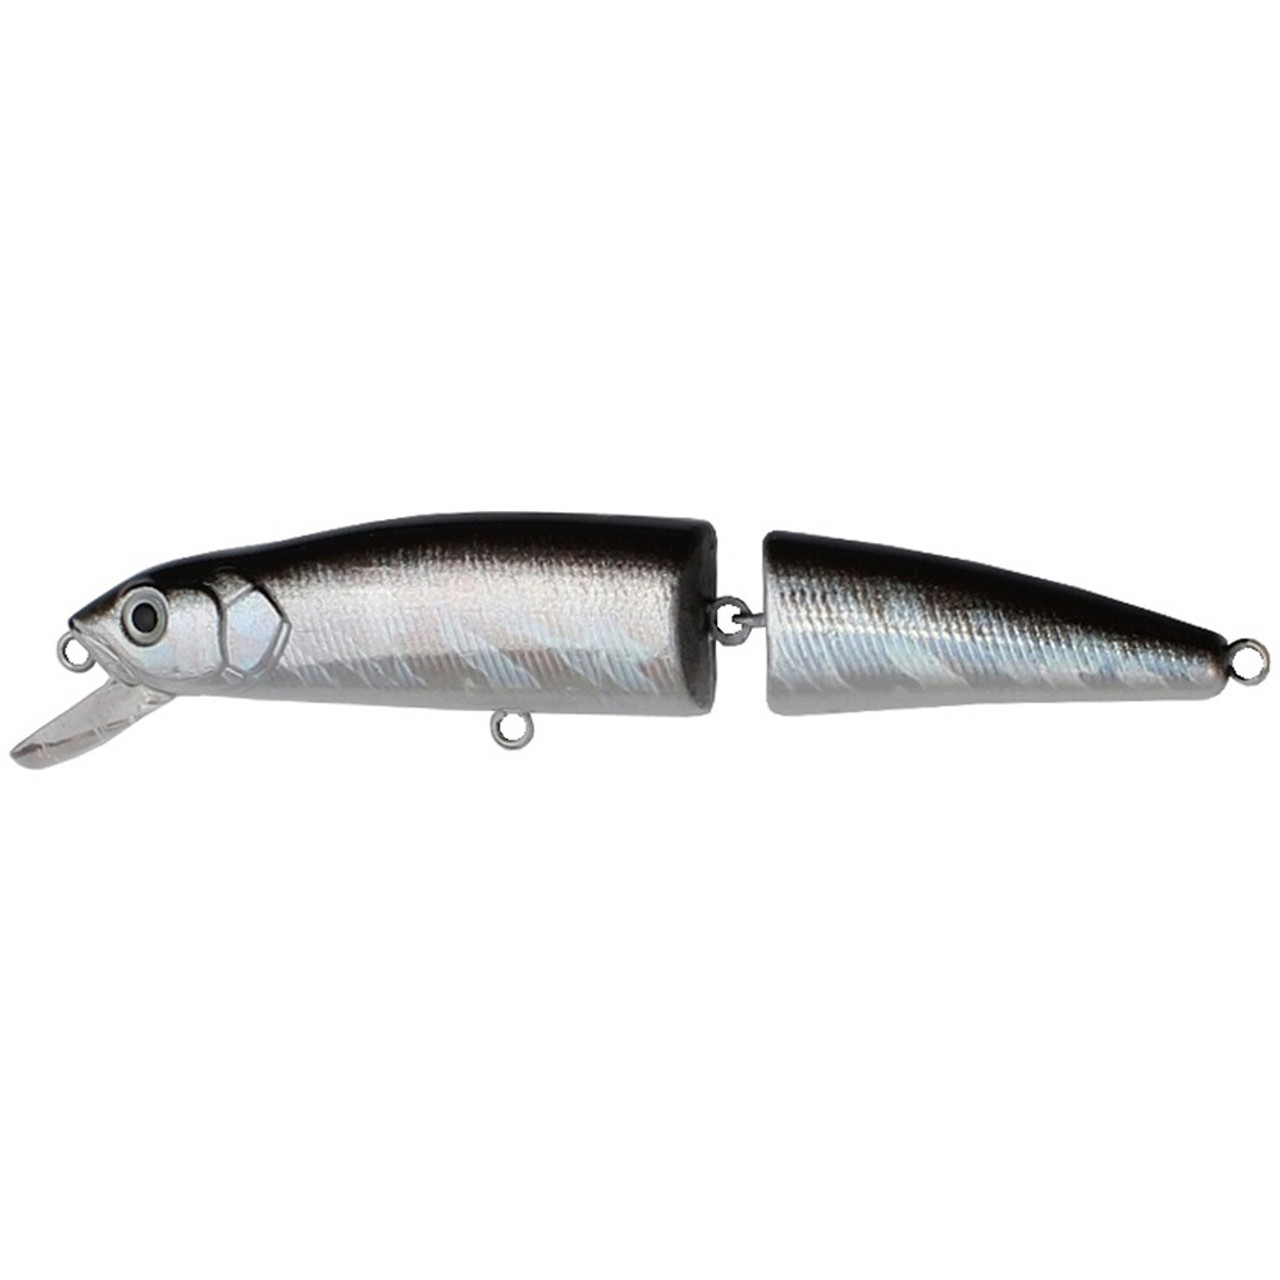 Challenger Jointed Minnow - 4 3/8 - 1/2oz 